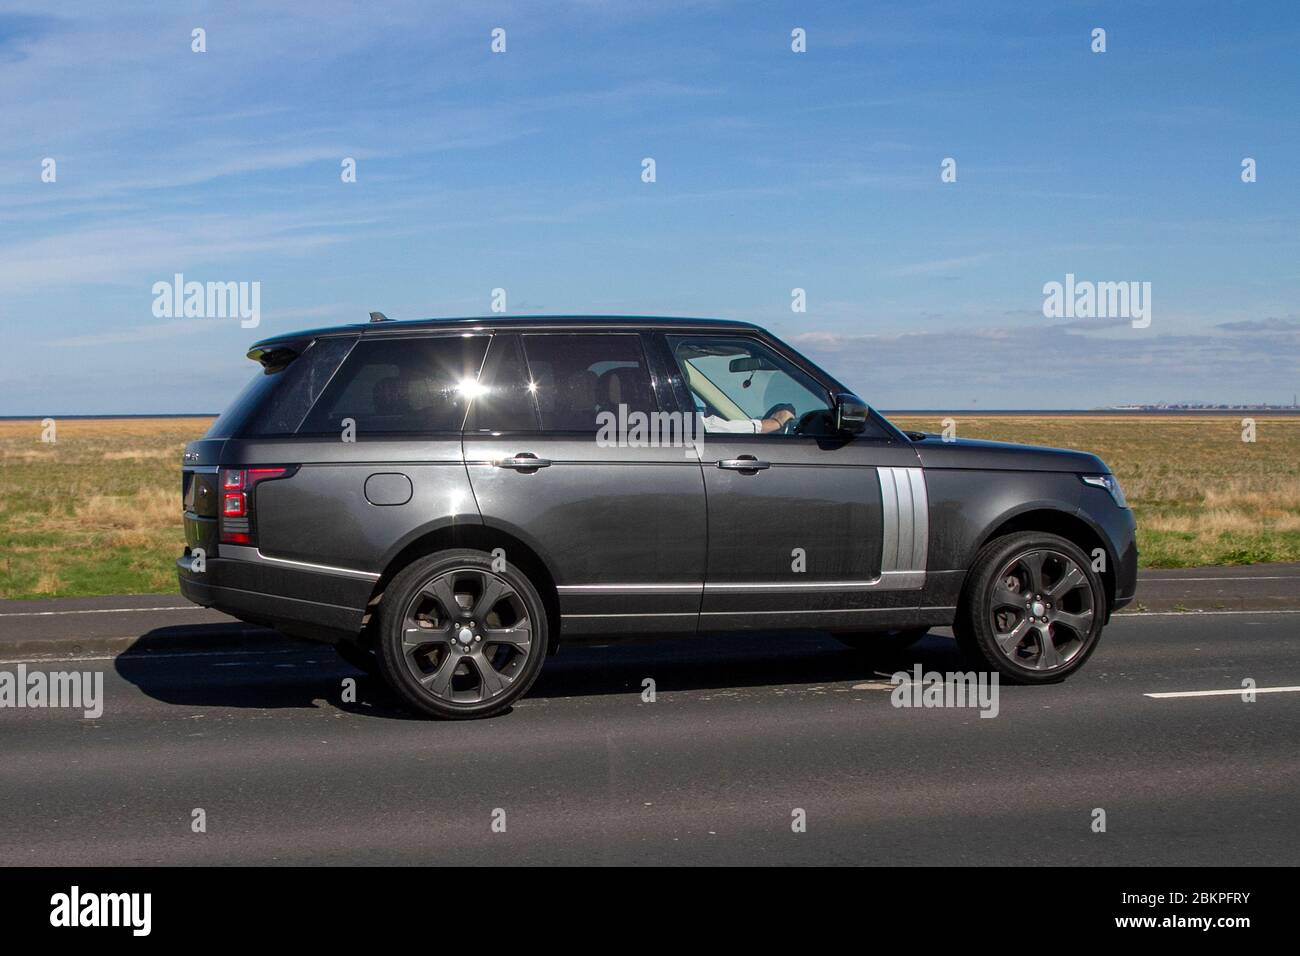 2015 grey LAND ROVER RANGE ROVER DIESEL ESTATE 4.4 SDV8 Autobiography 4dr Auto; Vehicular traffic moving vehicles, driving vehicle on UK roads, motors, motoring on the coast road, Southport Merseyside UK Stock Photo